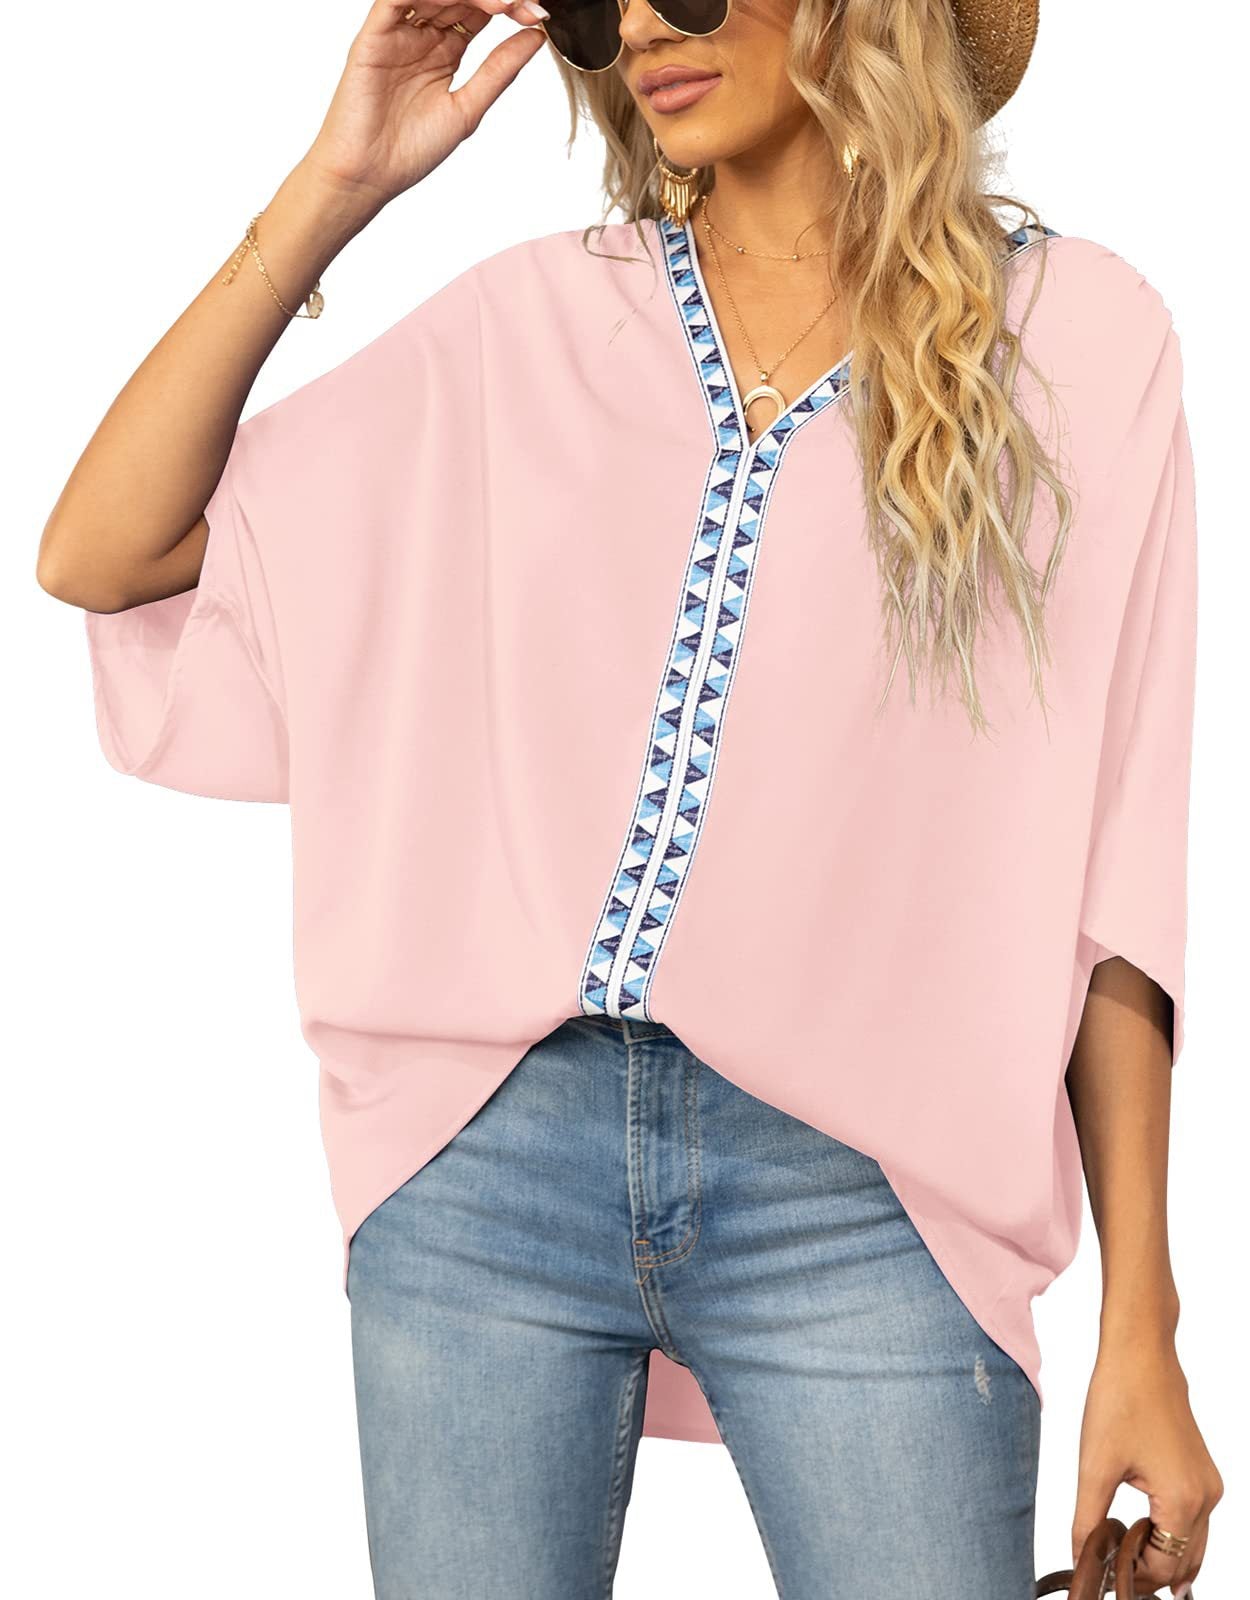 Batwing Sleeve Chiffon Shirt with V-Neckline and Short Sleeves